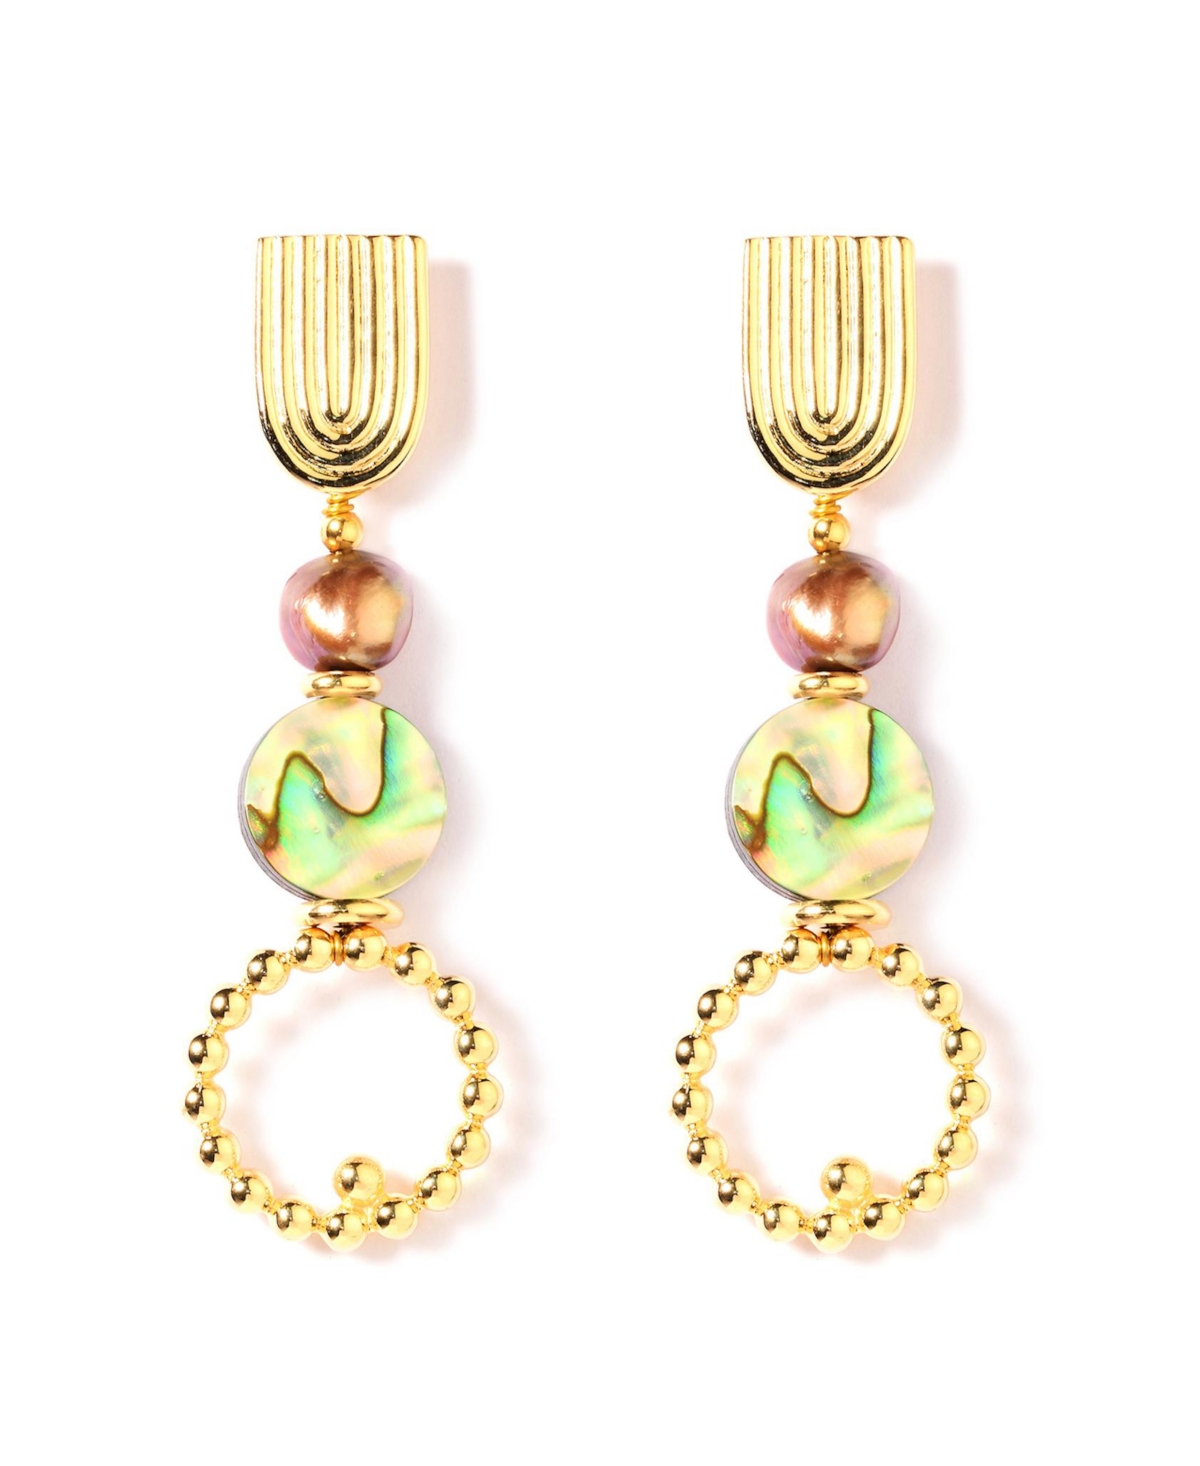 Nectar Nectar New York Tranquility Abalone Dangle Earrings In Gold Plated